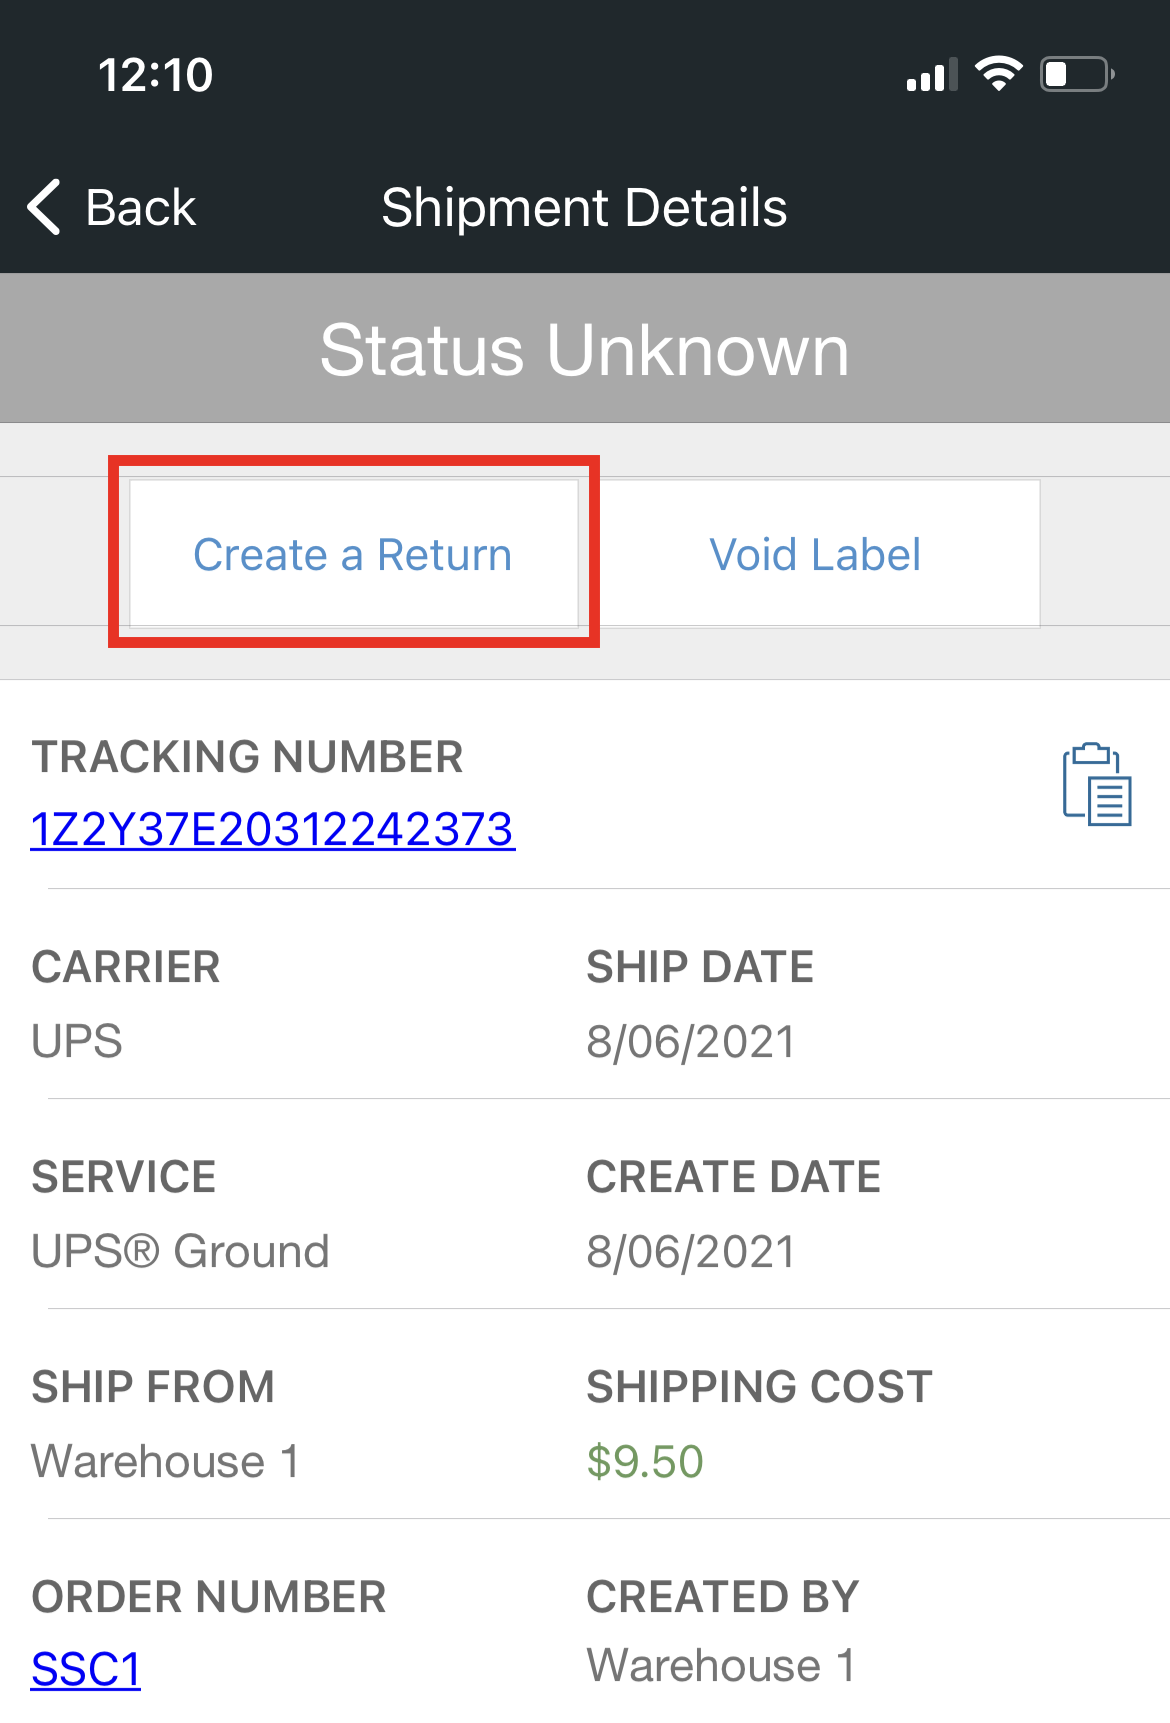 Mobile create return button in shipment details